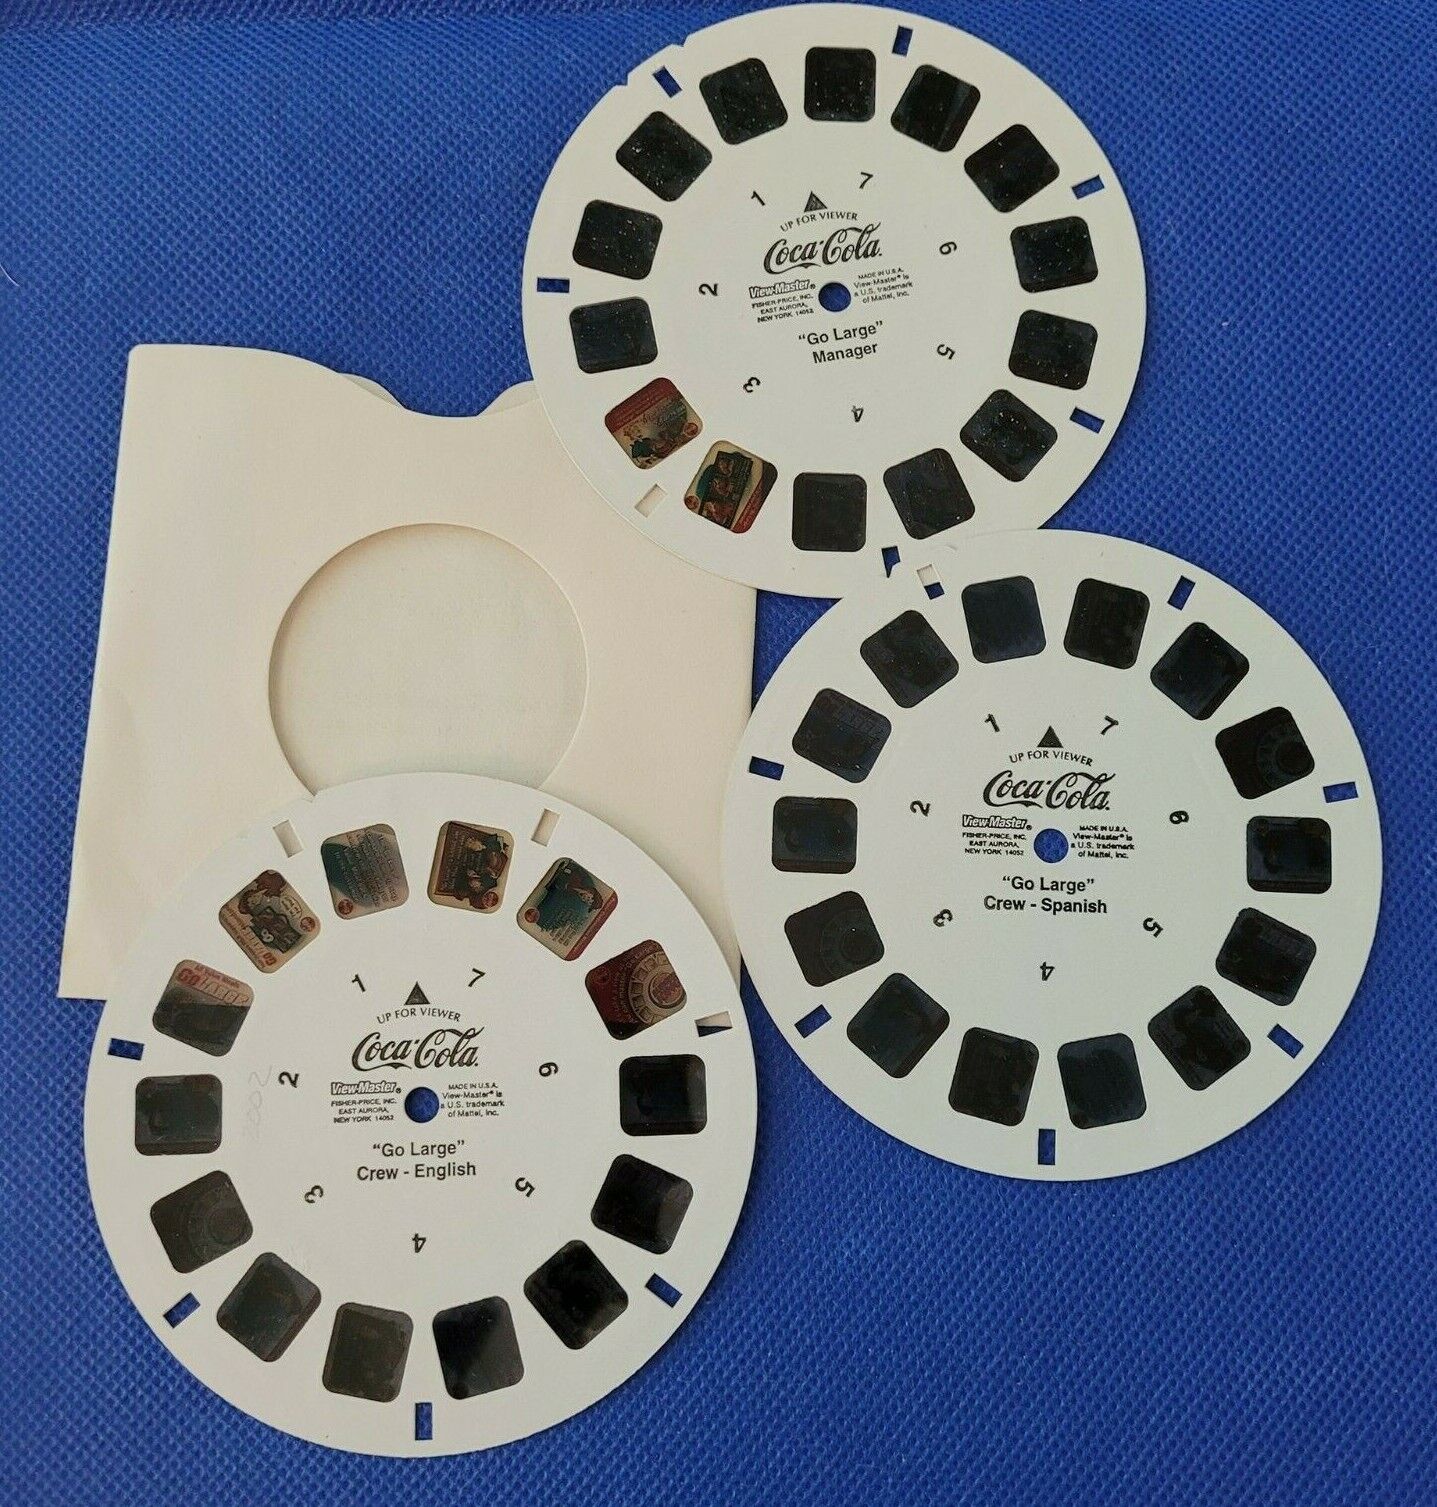 Coca Cola Coke Marketing Advertising Commercial Advert view-master 3 reels